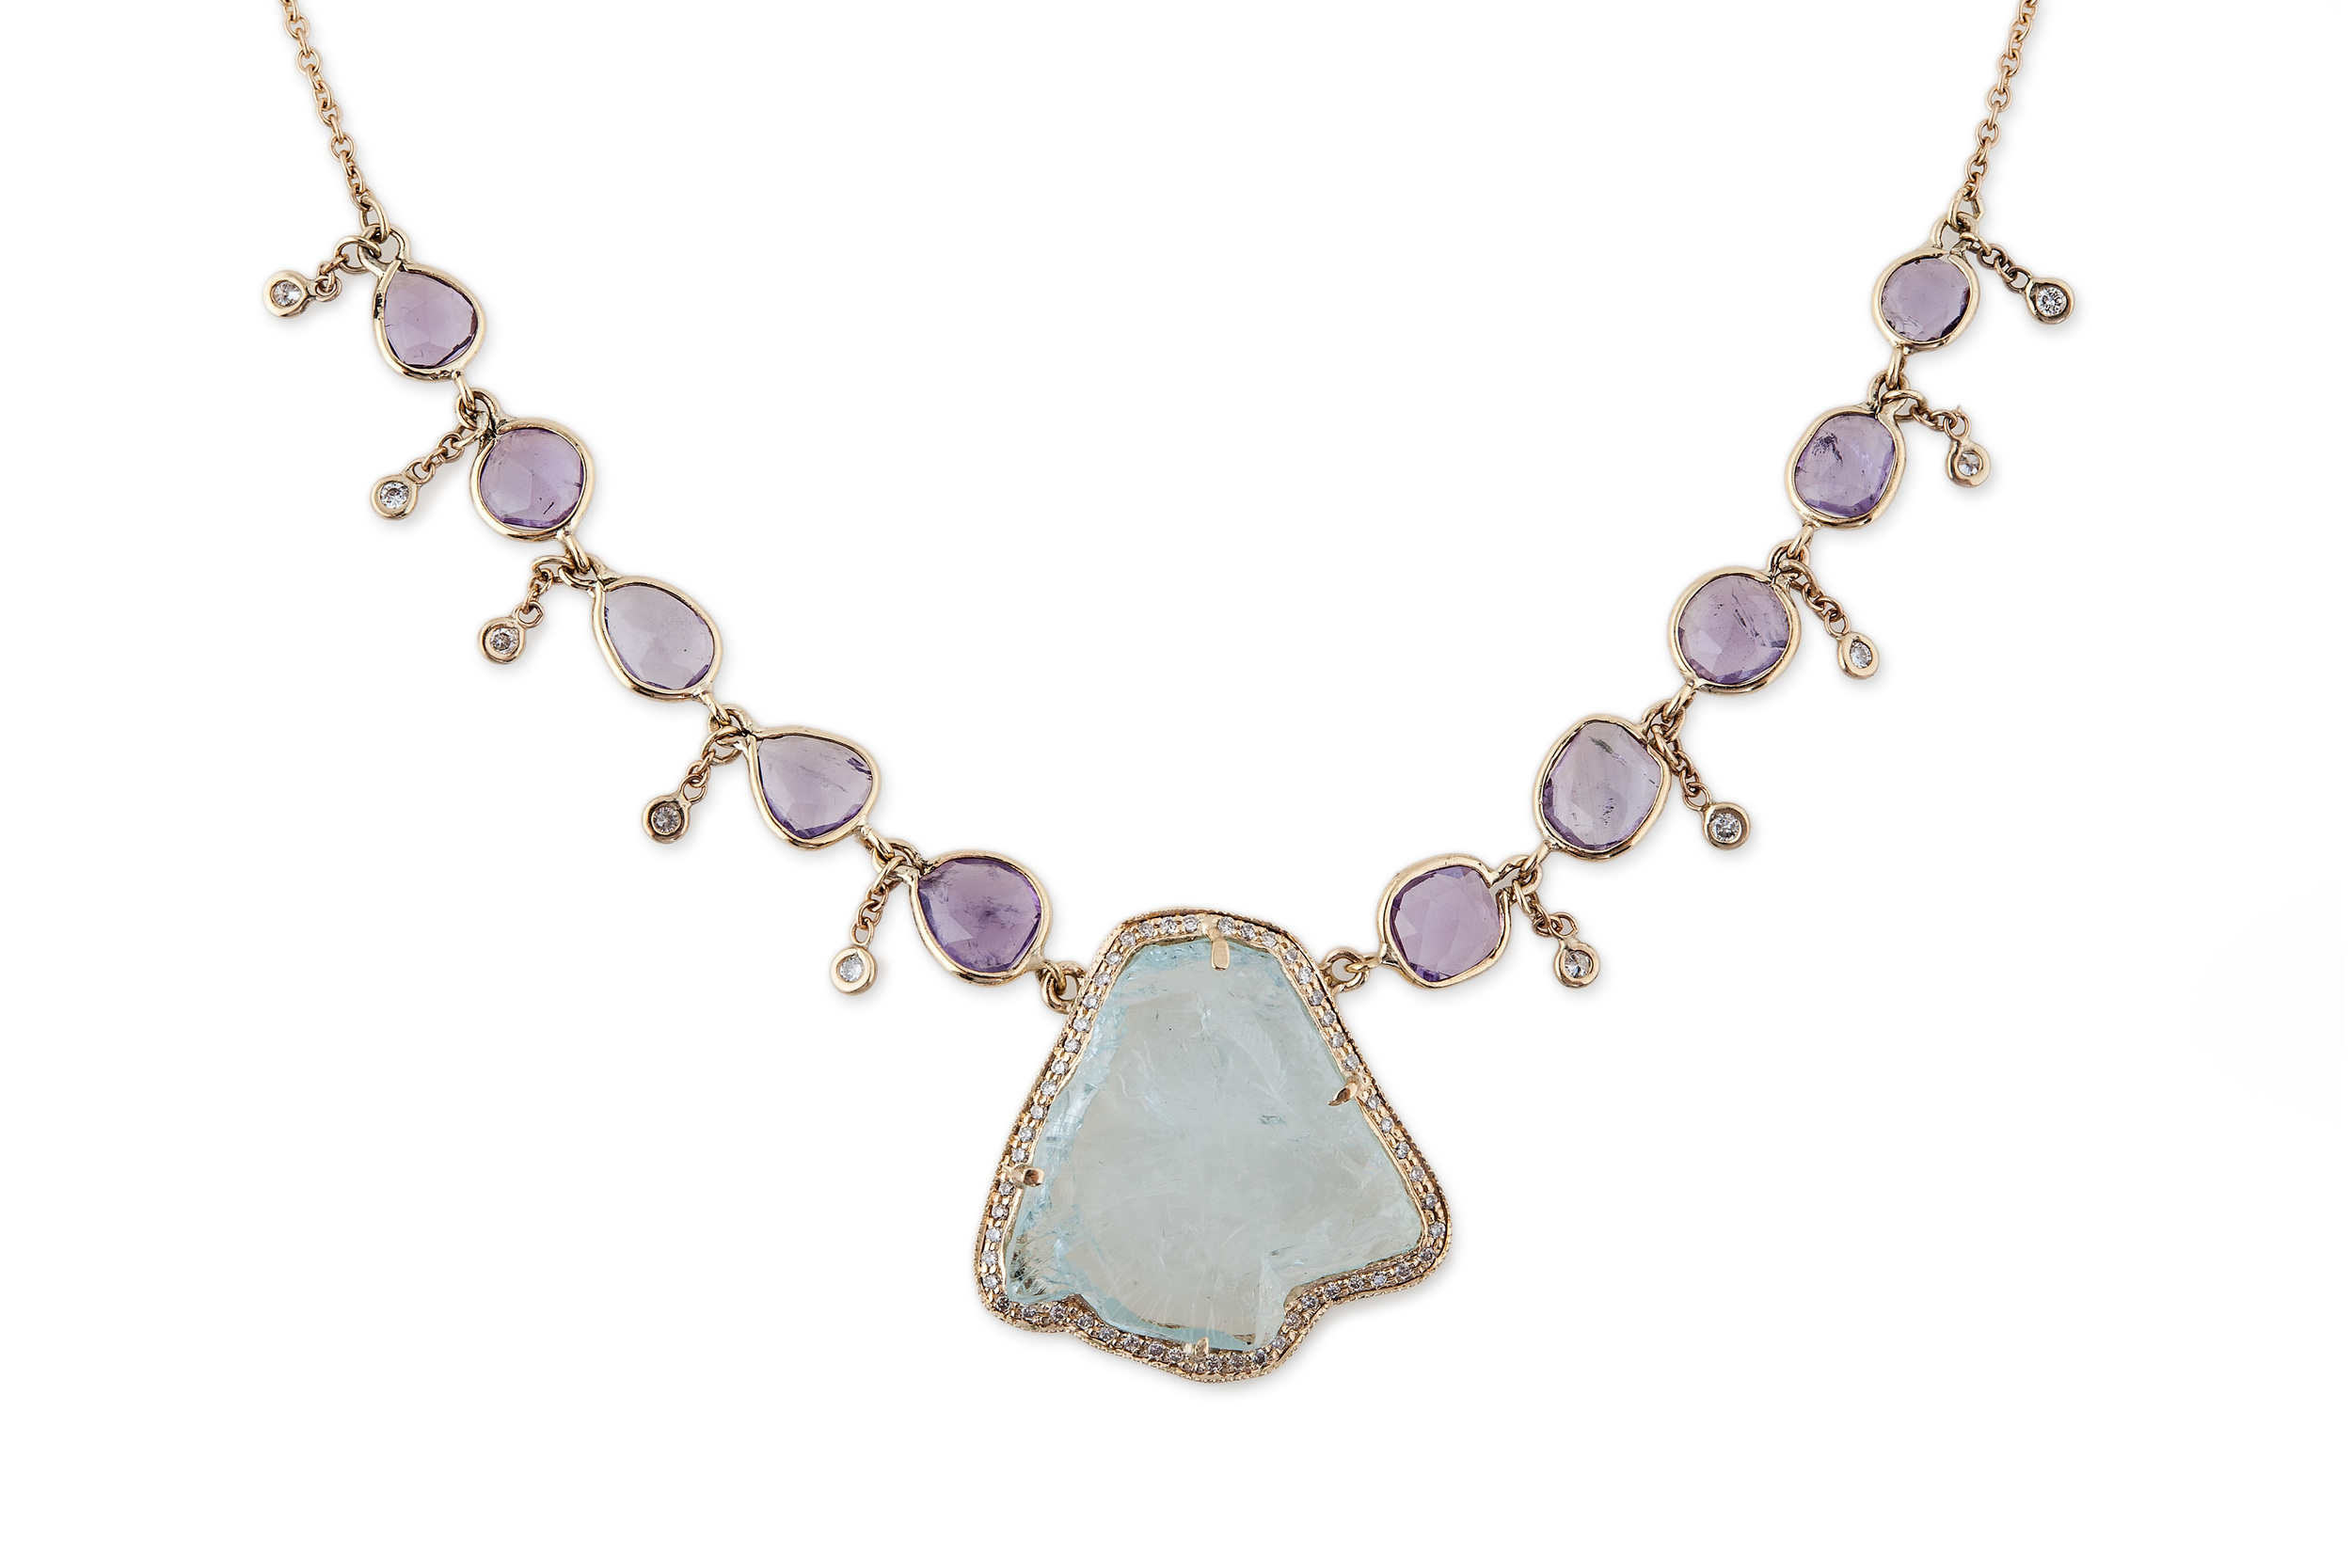  Freeform Aquamarine and Amethyst Shaker Necklace,&nbsp;$8,000, available at  Broken English .&nbsp; 